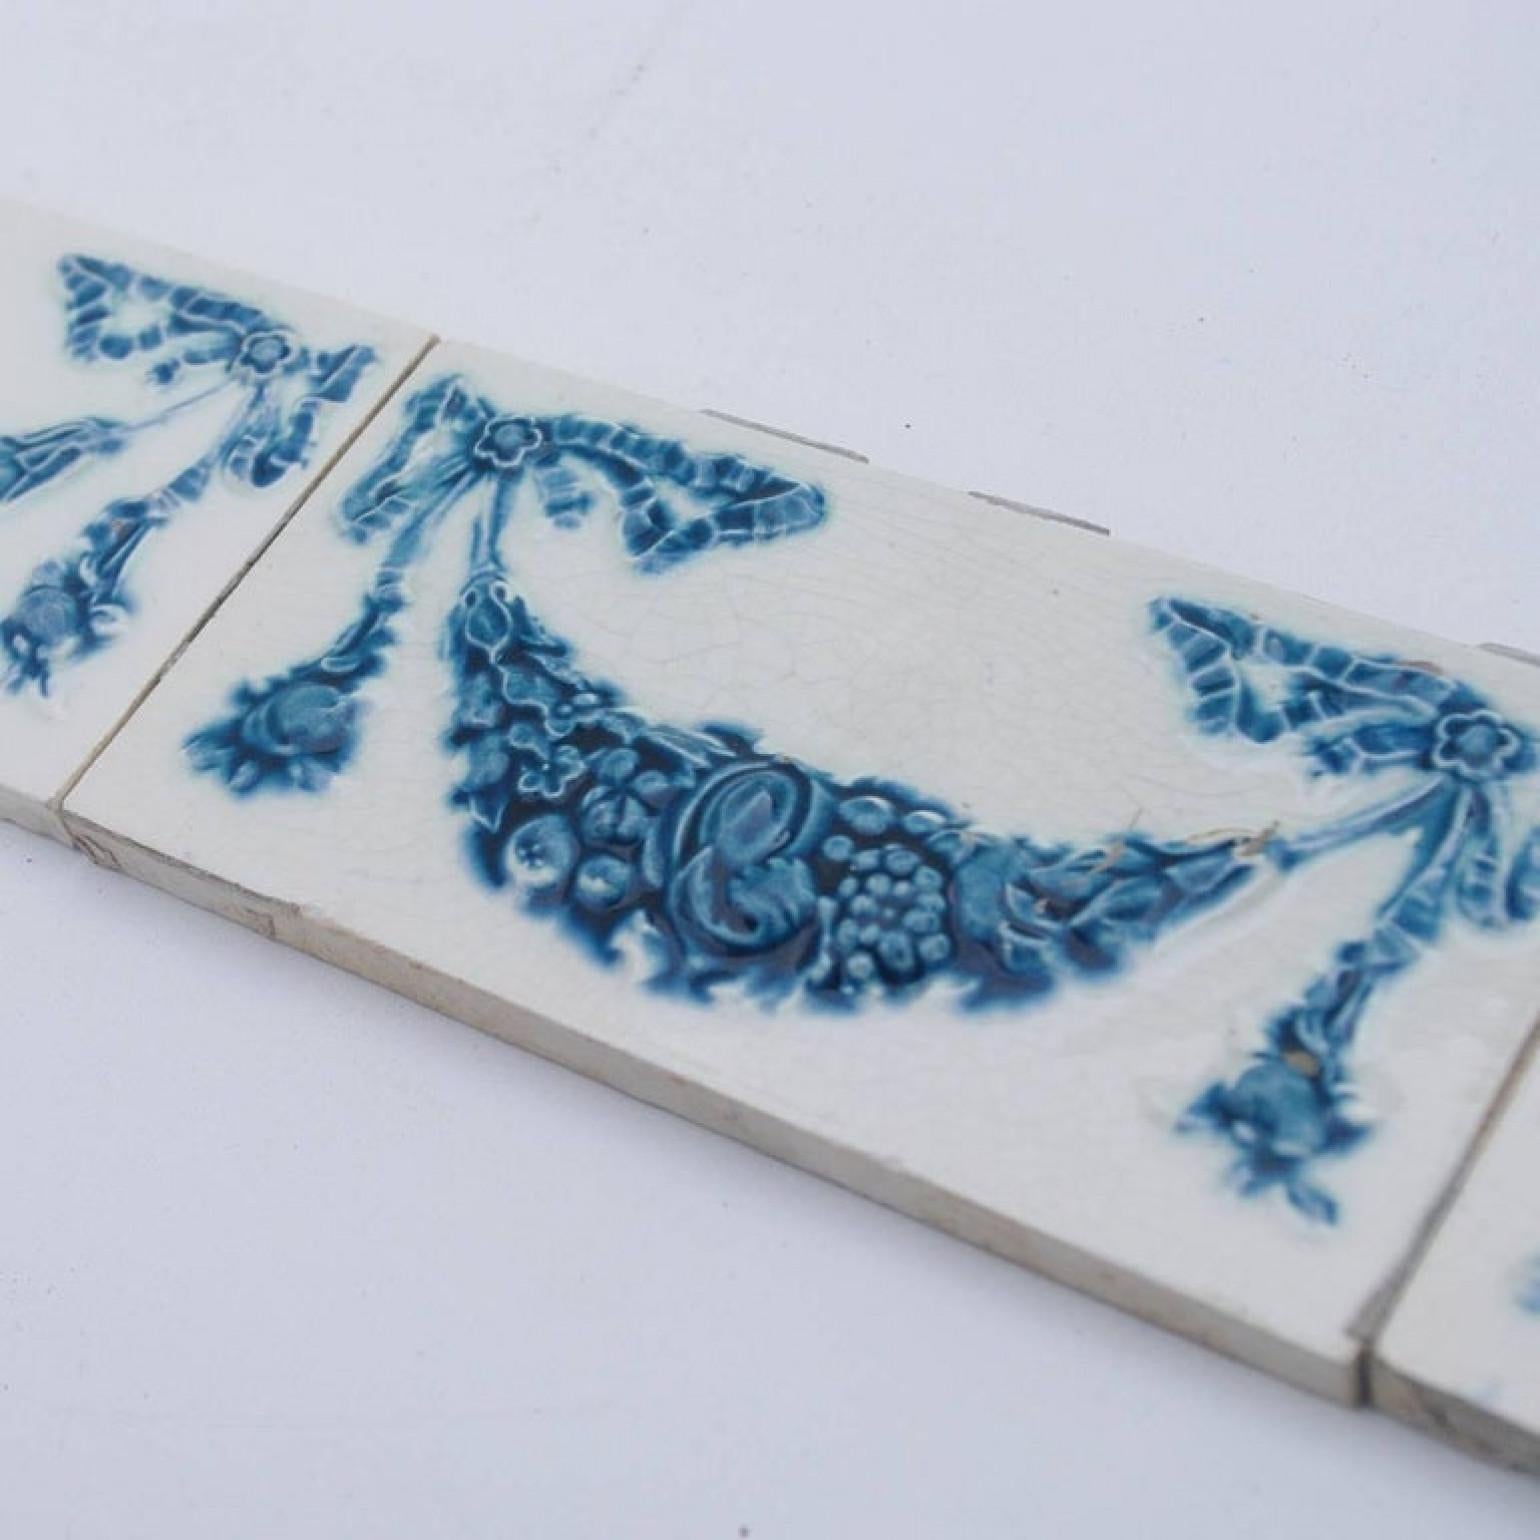 Glazed Set of 50 Hand Painted Ceramic Relief Tiles by Societe Morialme, 1895 For Sale